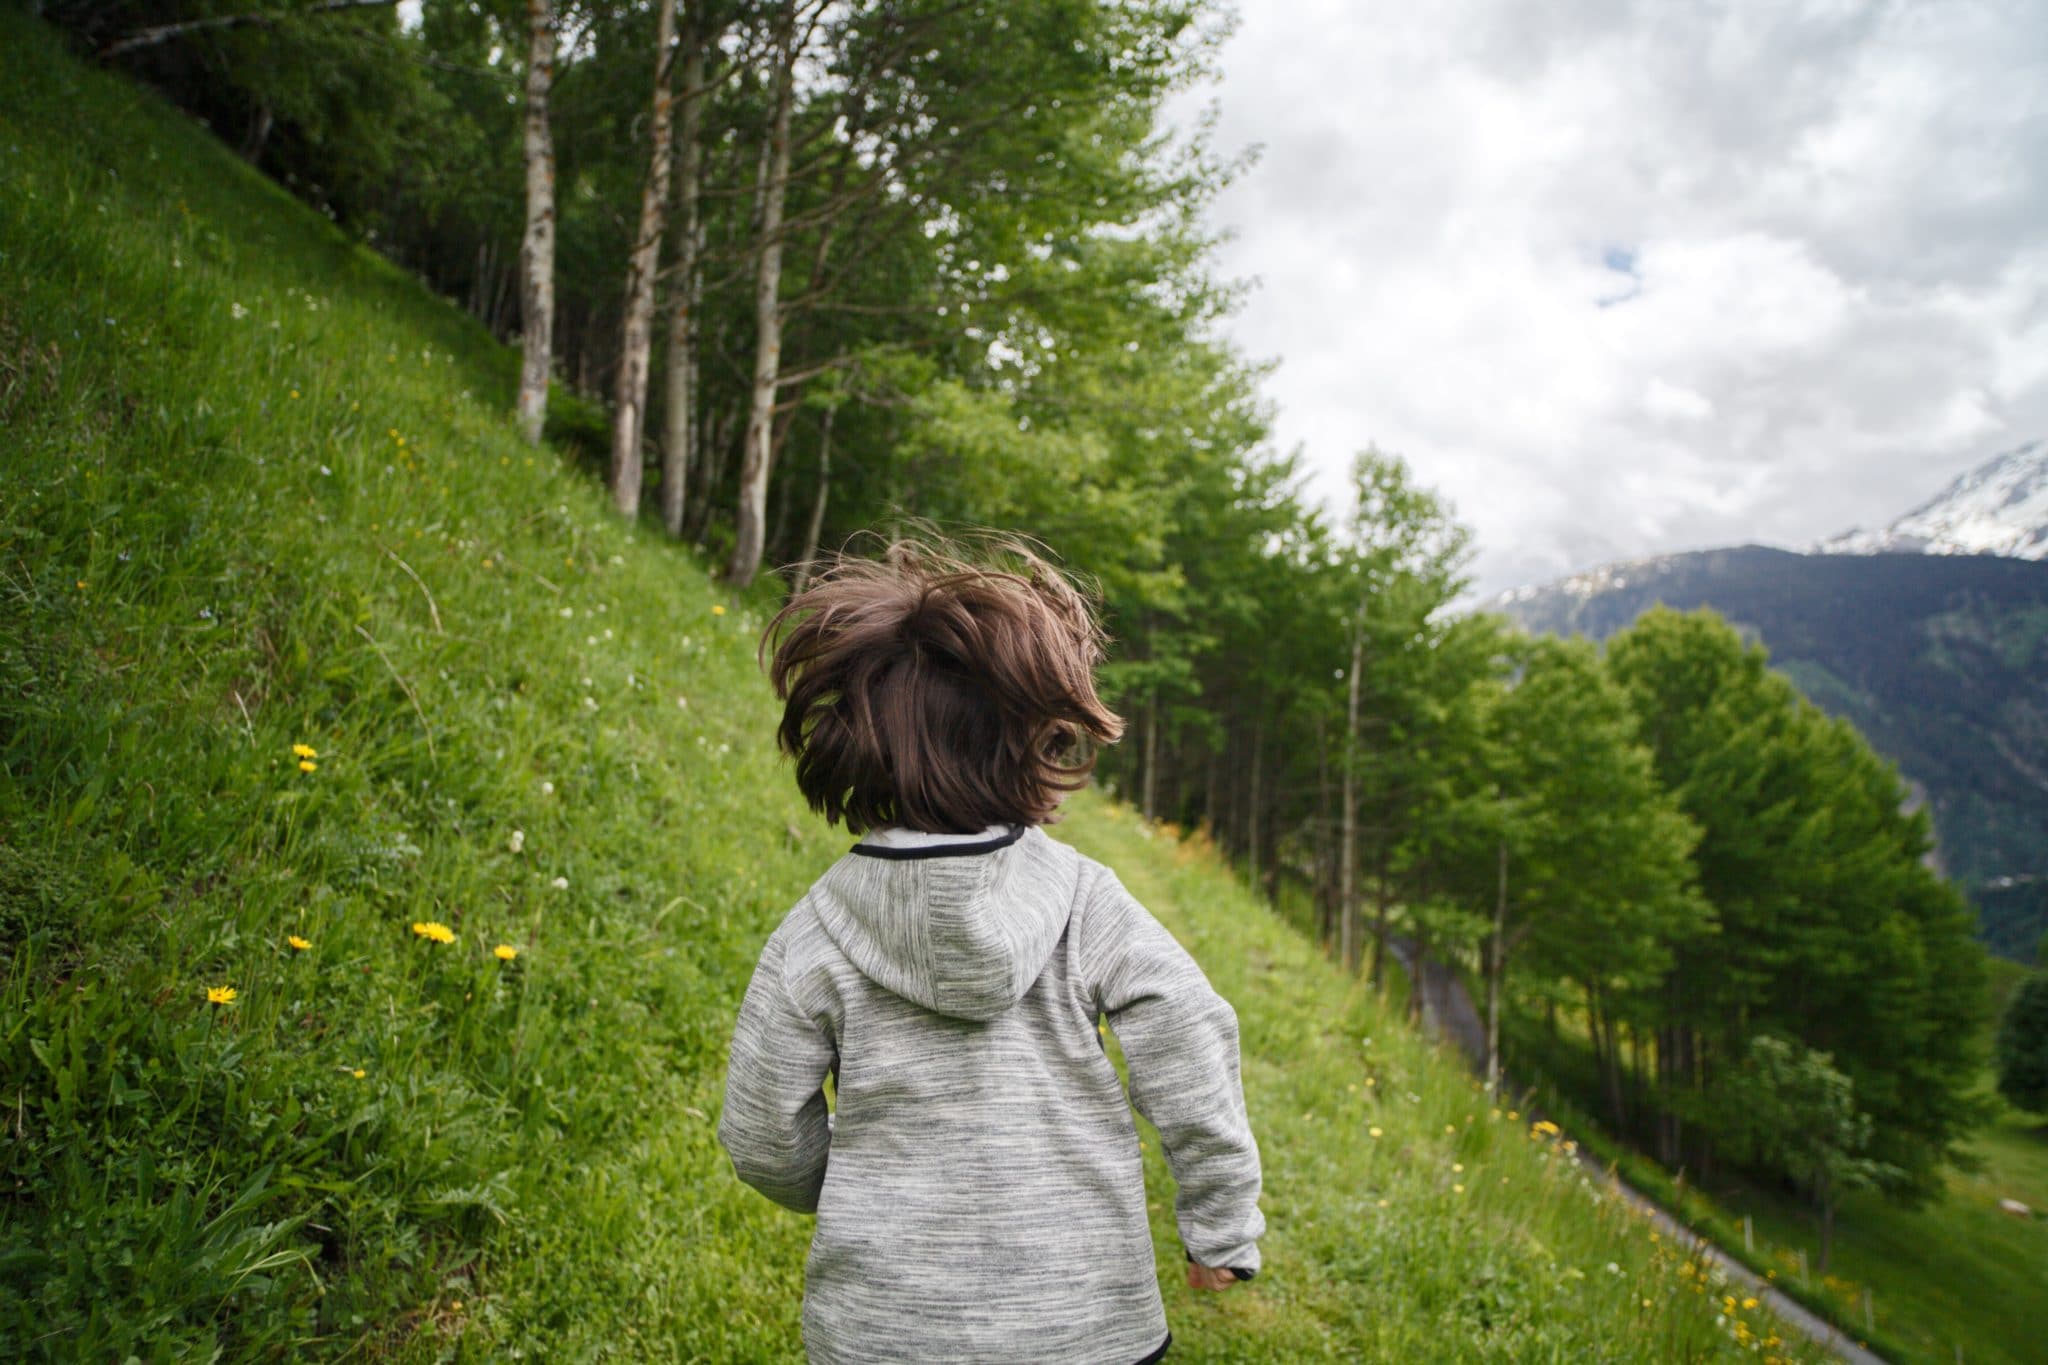 6 reasons children need to play outside - Harvard Health